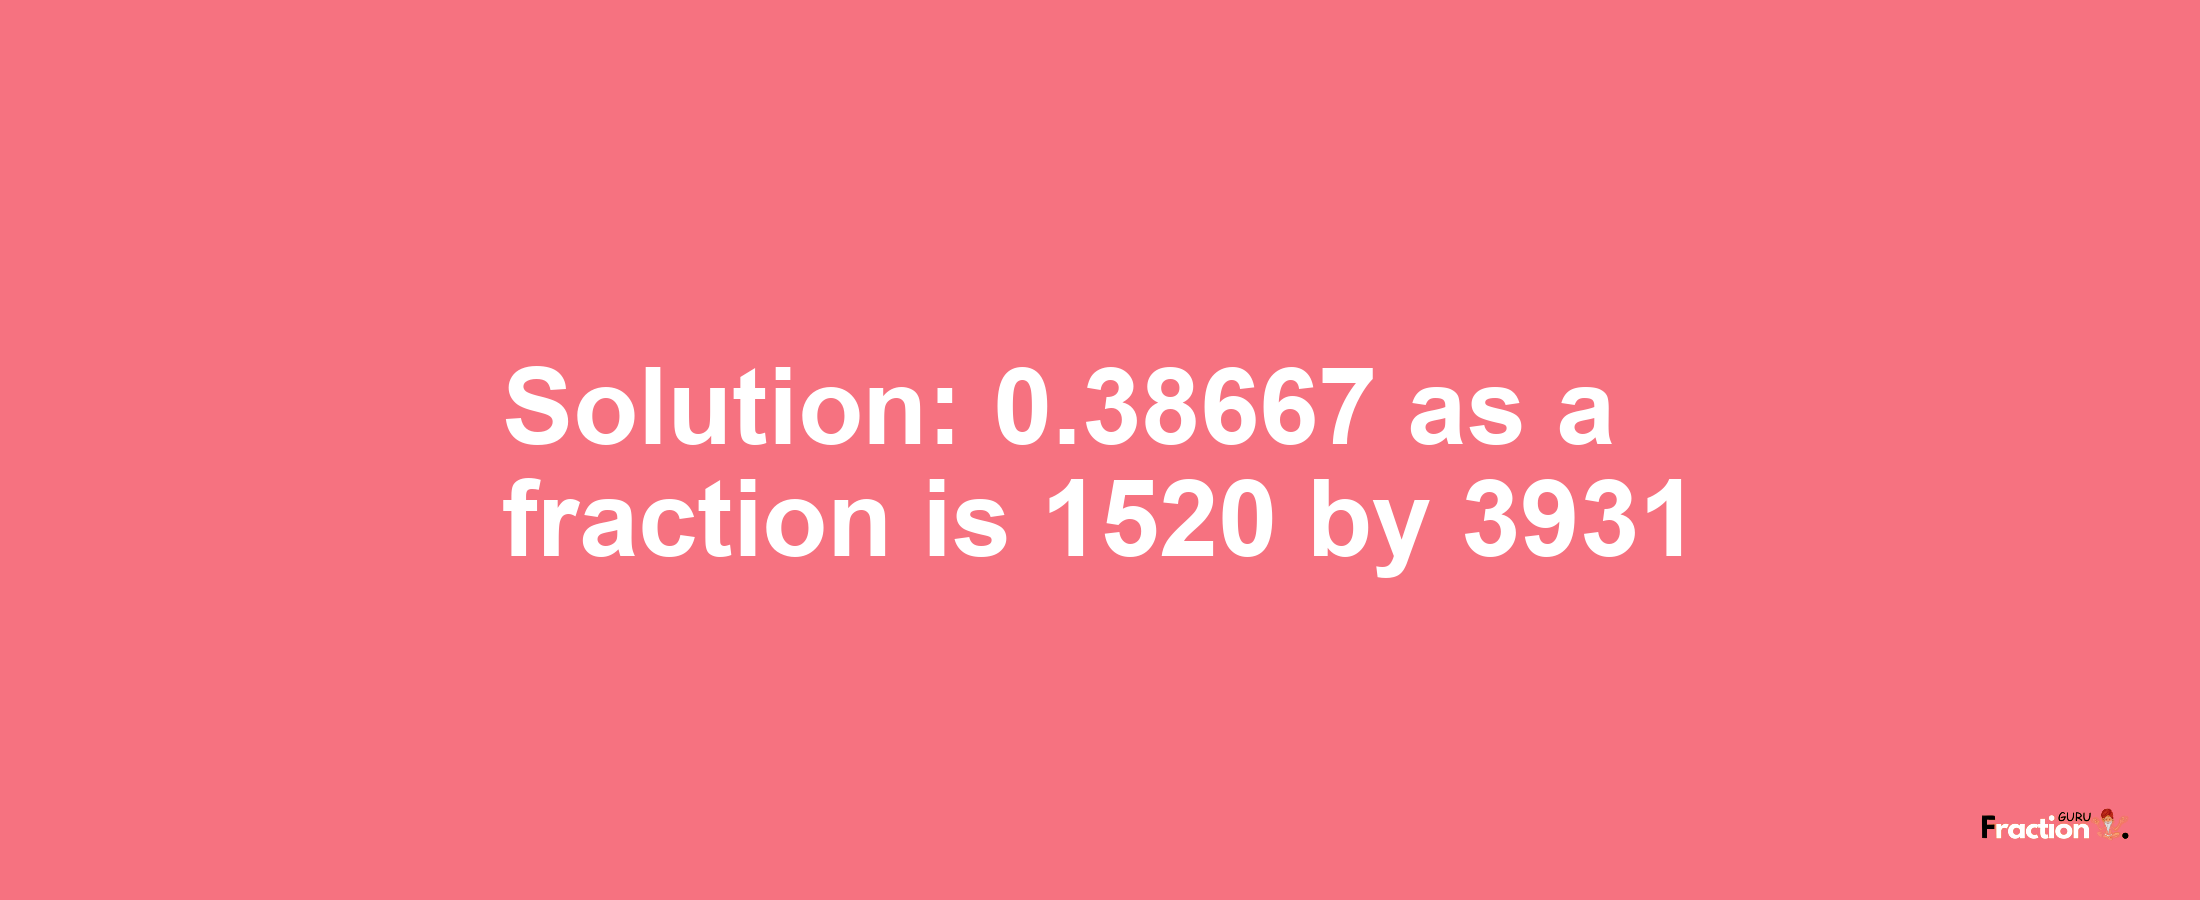 Solution:0.38667 as a fraction is 1520/3931